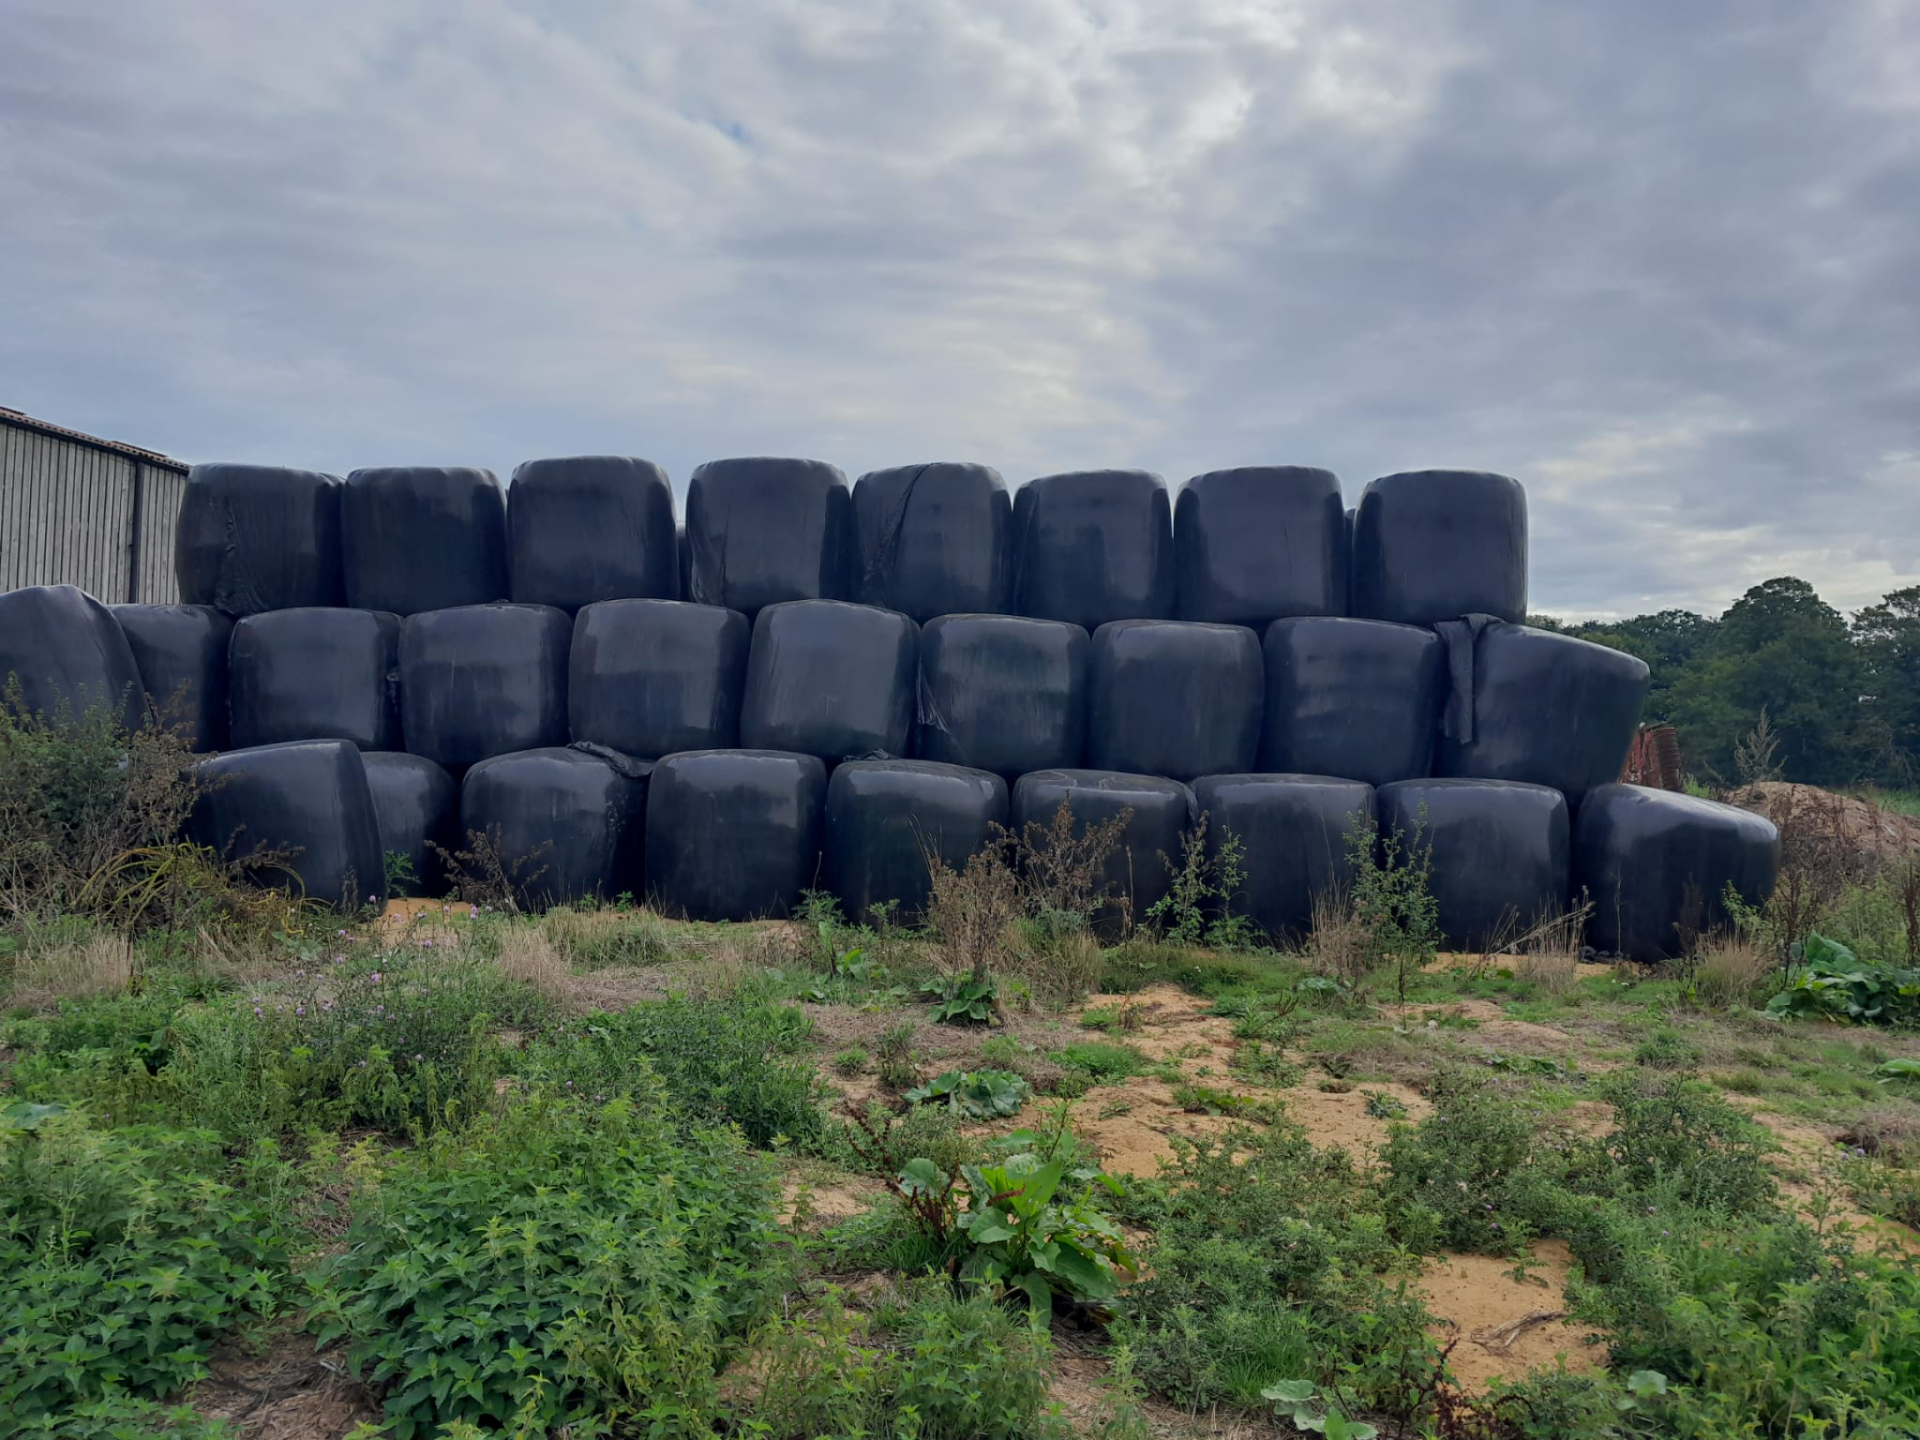 25 x 2021 Wrapped Round Bale Silage